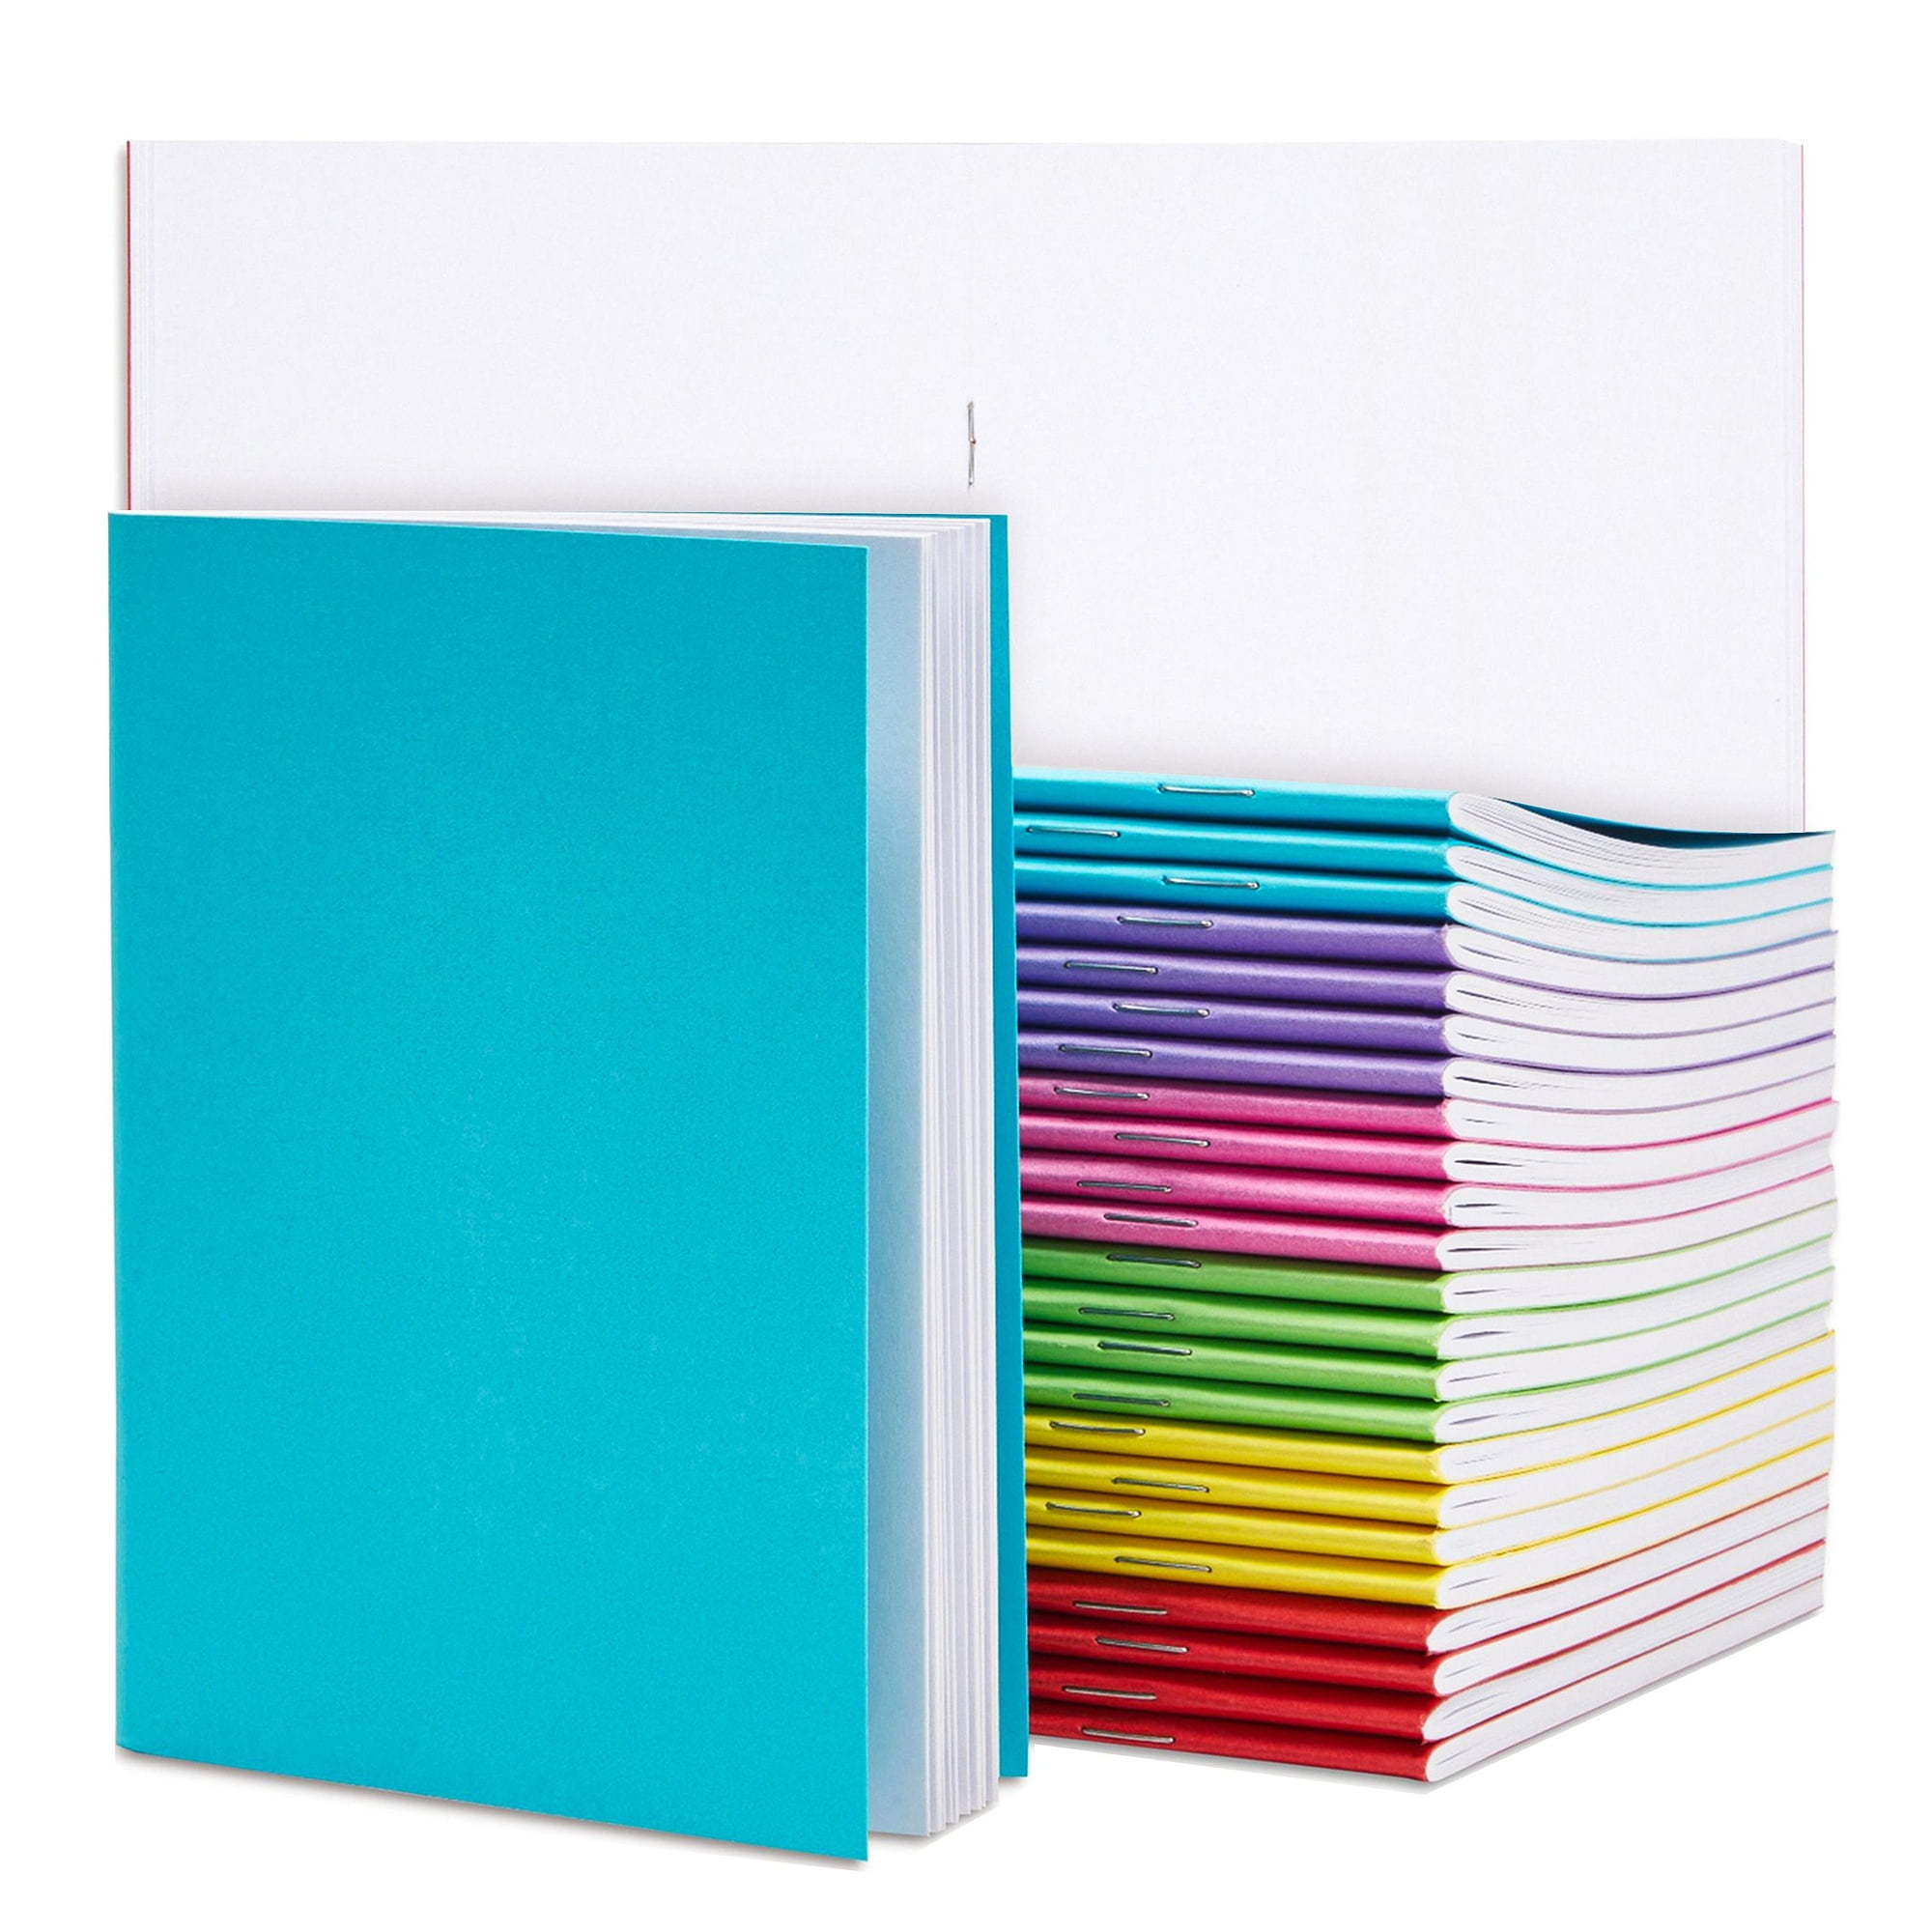 Blank Paperback Notebook Journals (5.5 x 8.5 Inches, White, 24